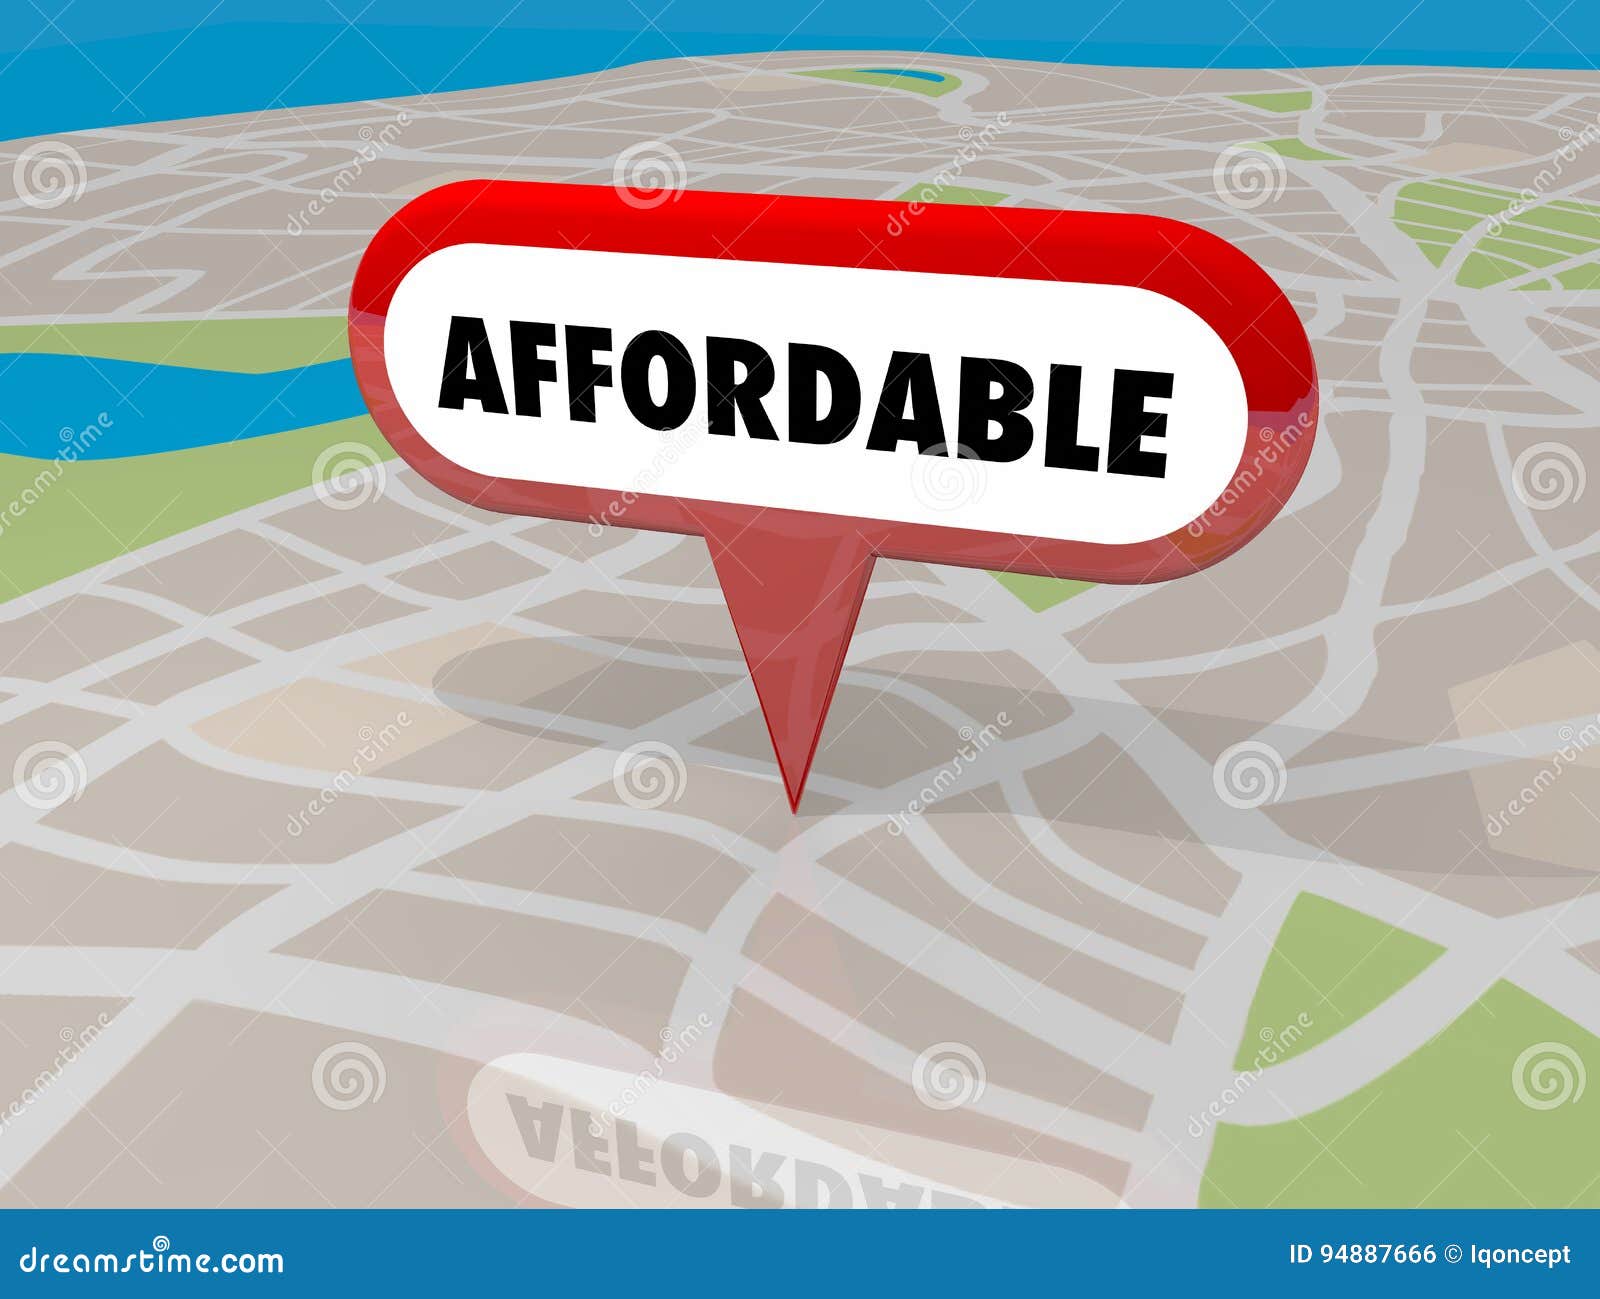 affordable housing real estate building property map pin 3d 